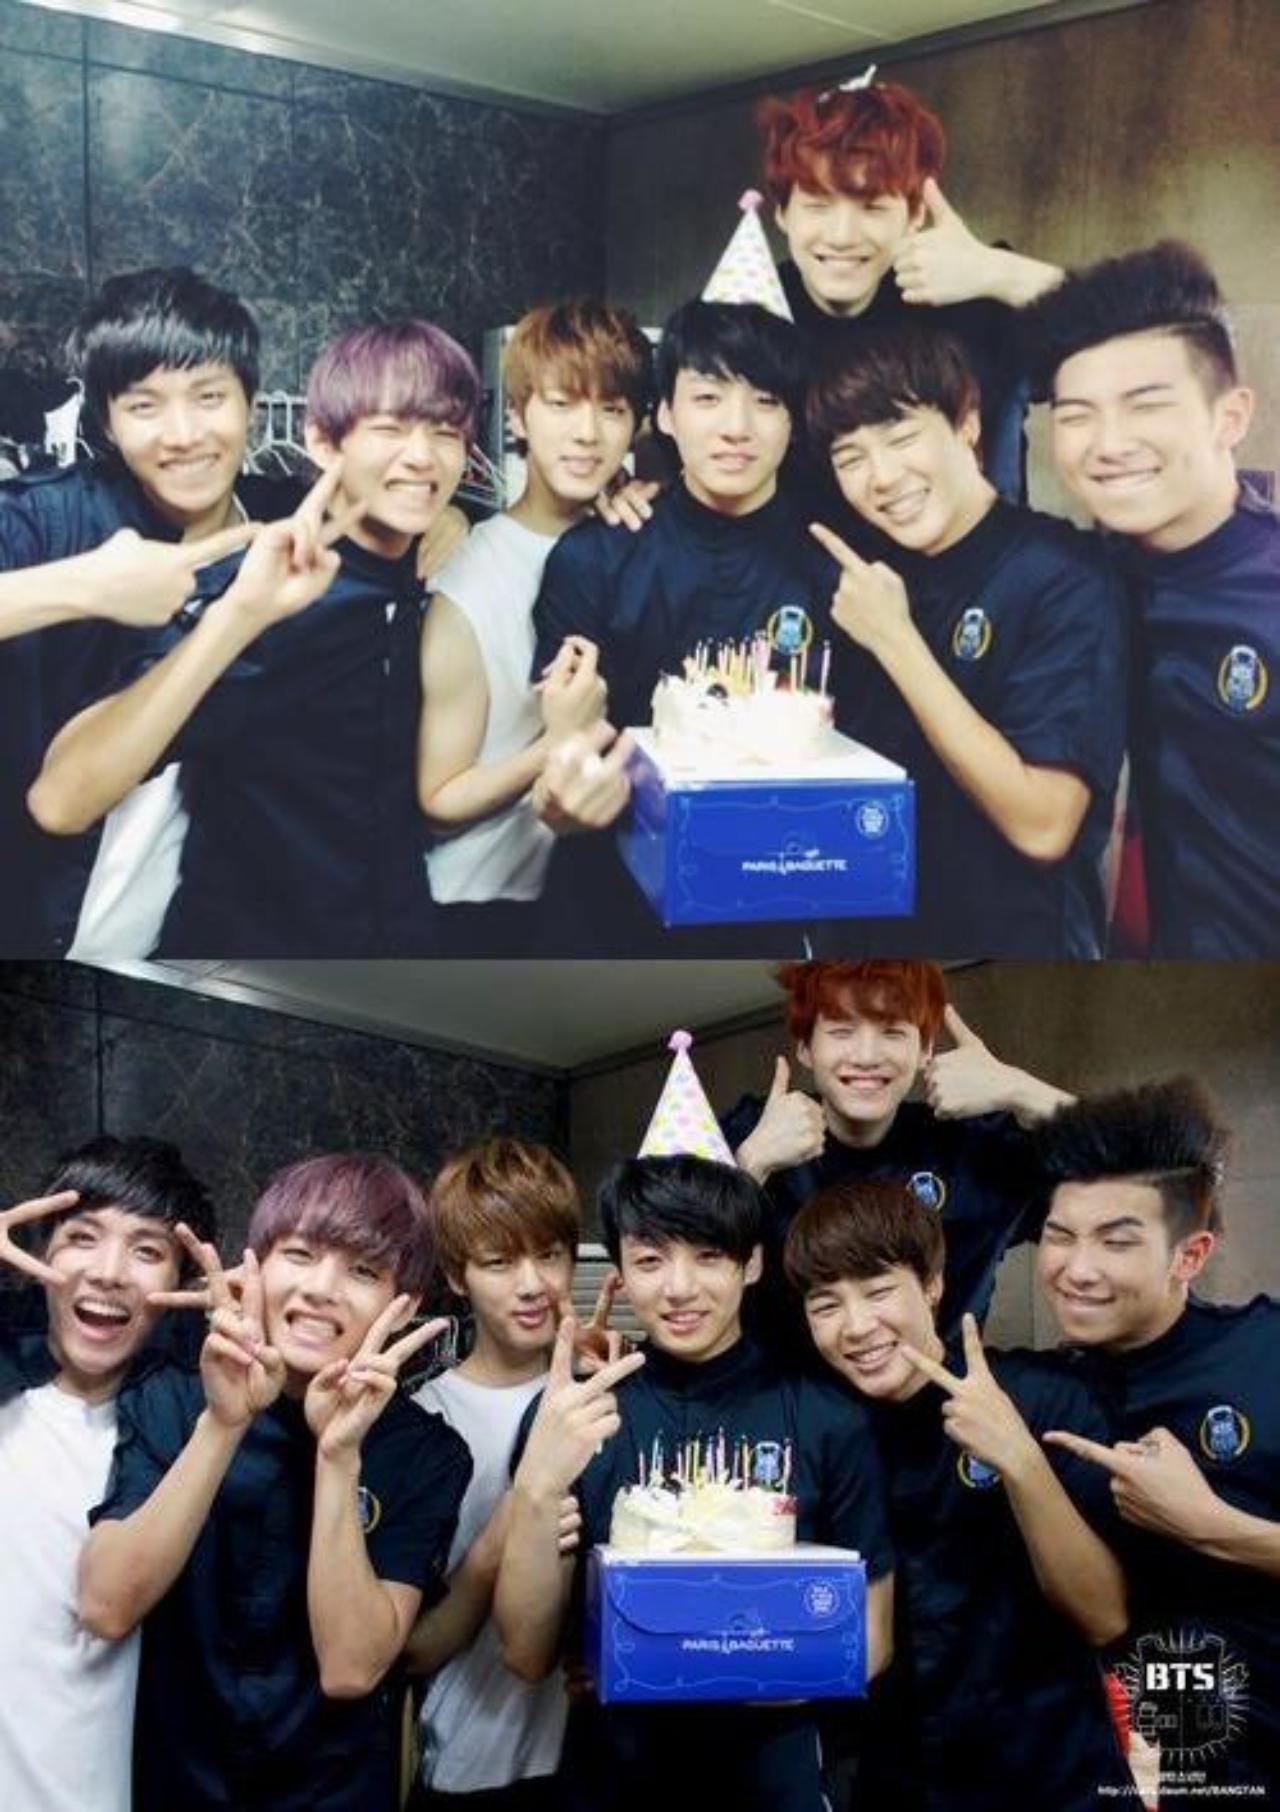 BTS threw surprise birthday parties, to let each member know how special he is to the rest of the group. No matter how low their budget was, they always made sure to celebrate each person's birthday. This particular birthday, when Jungkook was 'pretend' scolded for not perfecting his dance moves during a shoot and then surprised with a birthday party remains a memorable moment for BTS and ARMYs alike. Look at how happy they are!